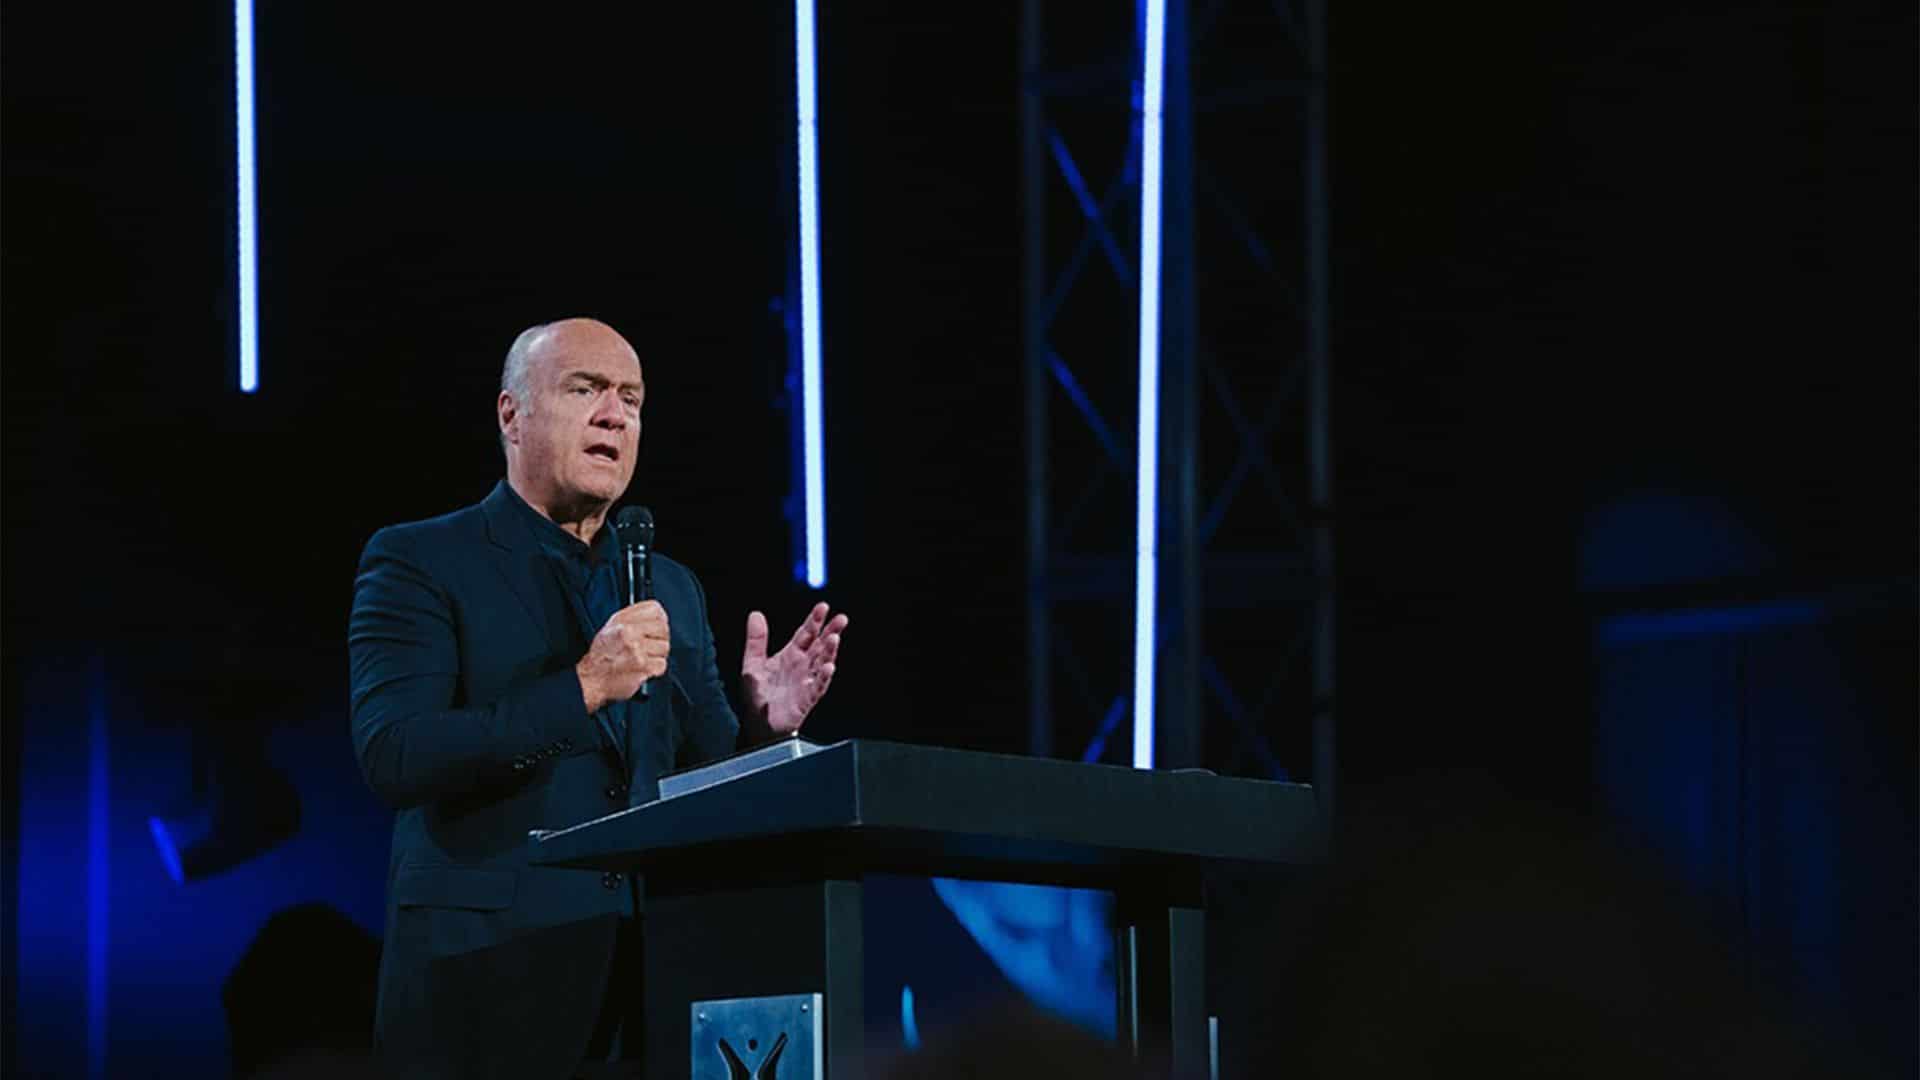 Pastor and teacher Greg Laurie shares a message from John 21 in our Easter Sunday Message at Harvest Christian Fellowship titled, “The Day Death Died”